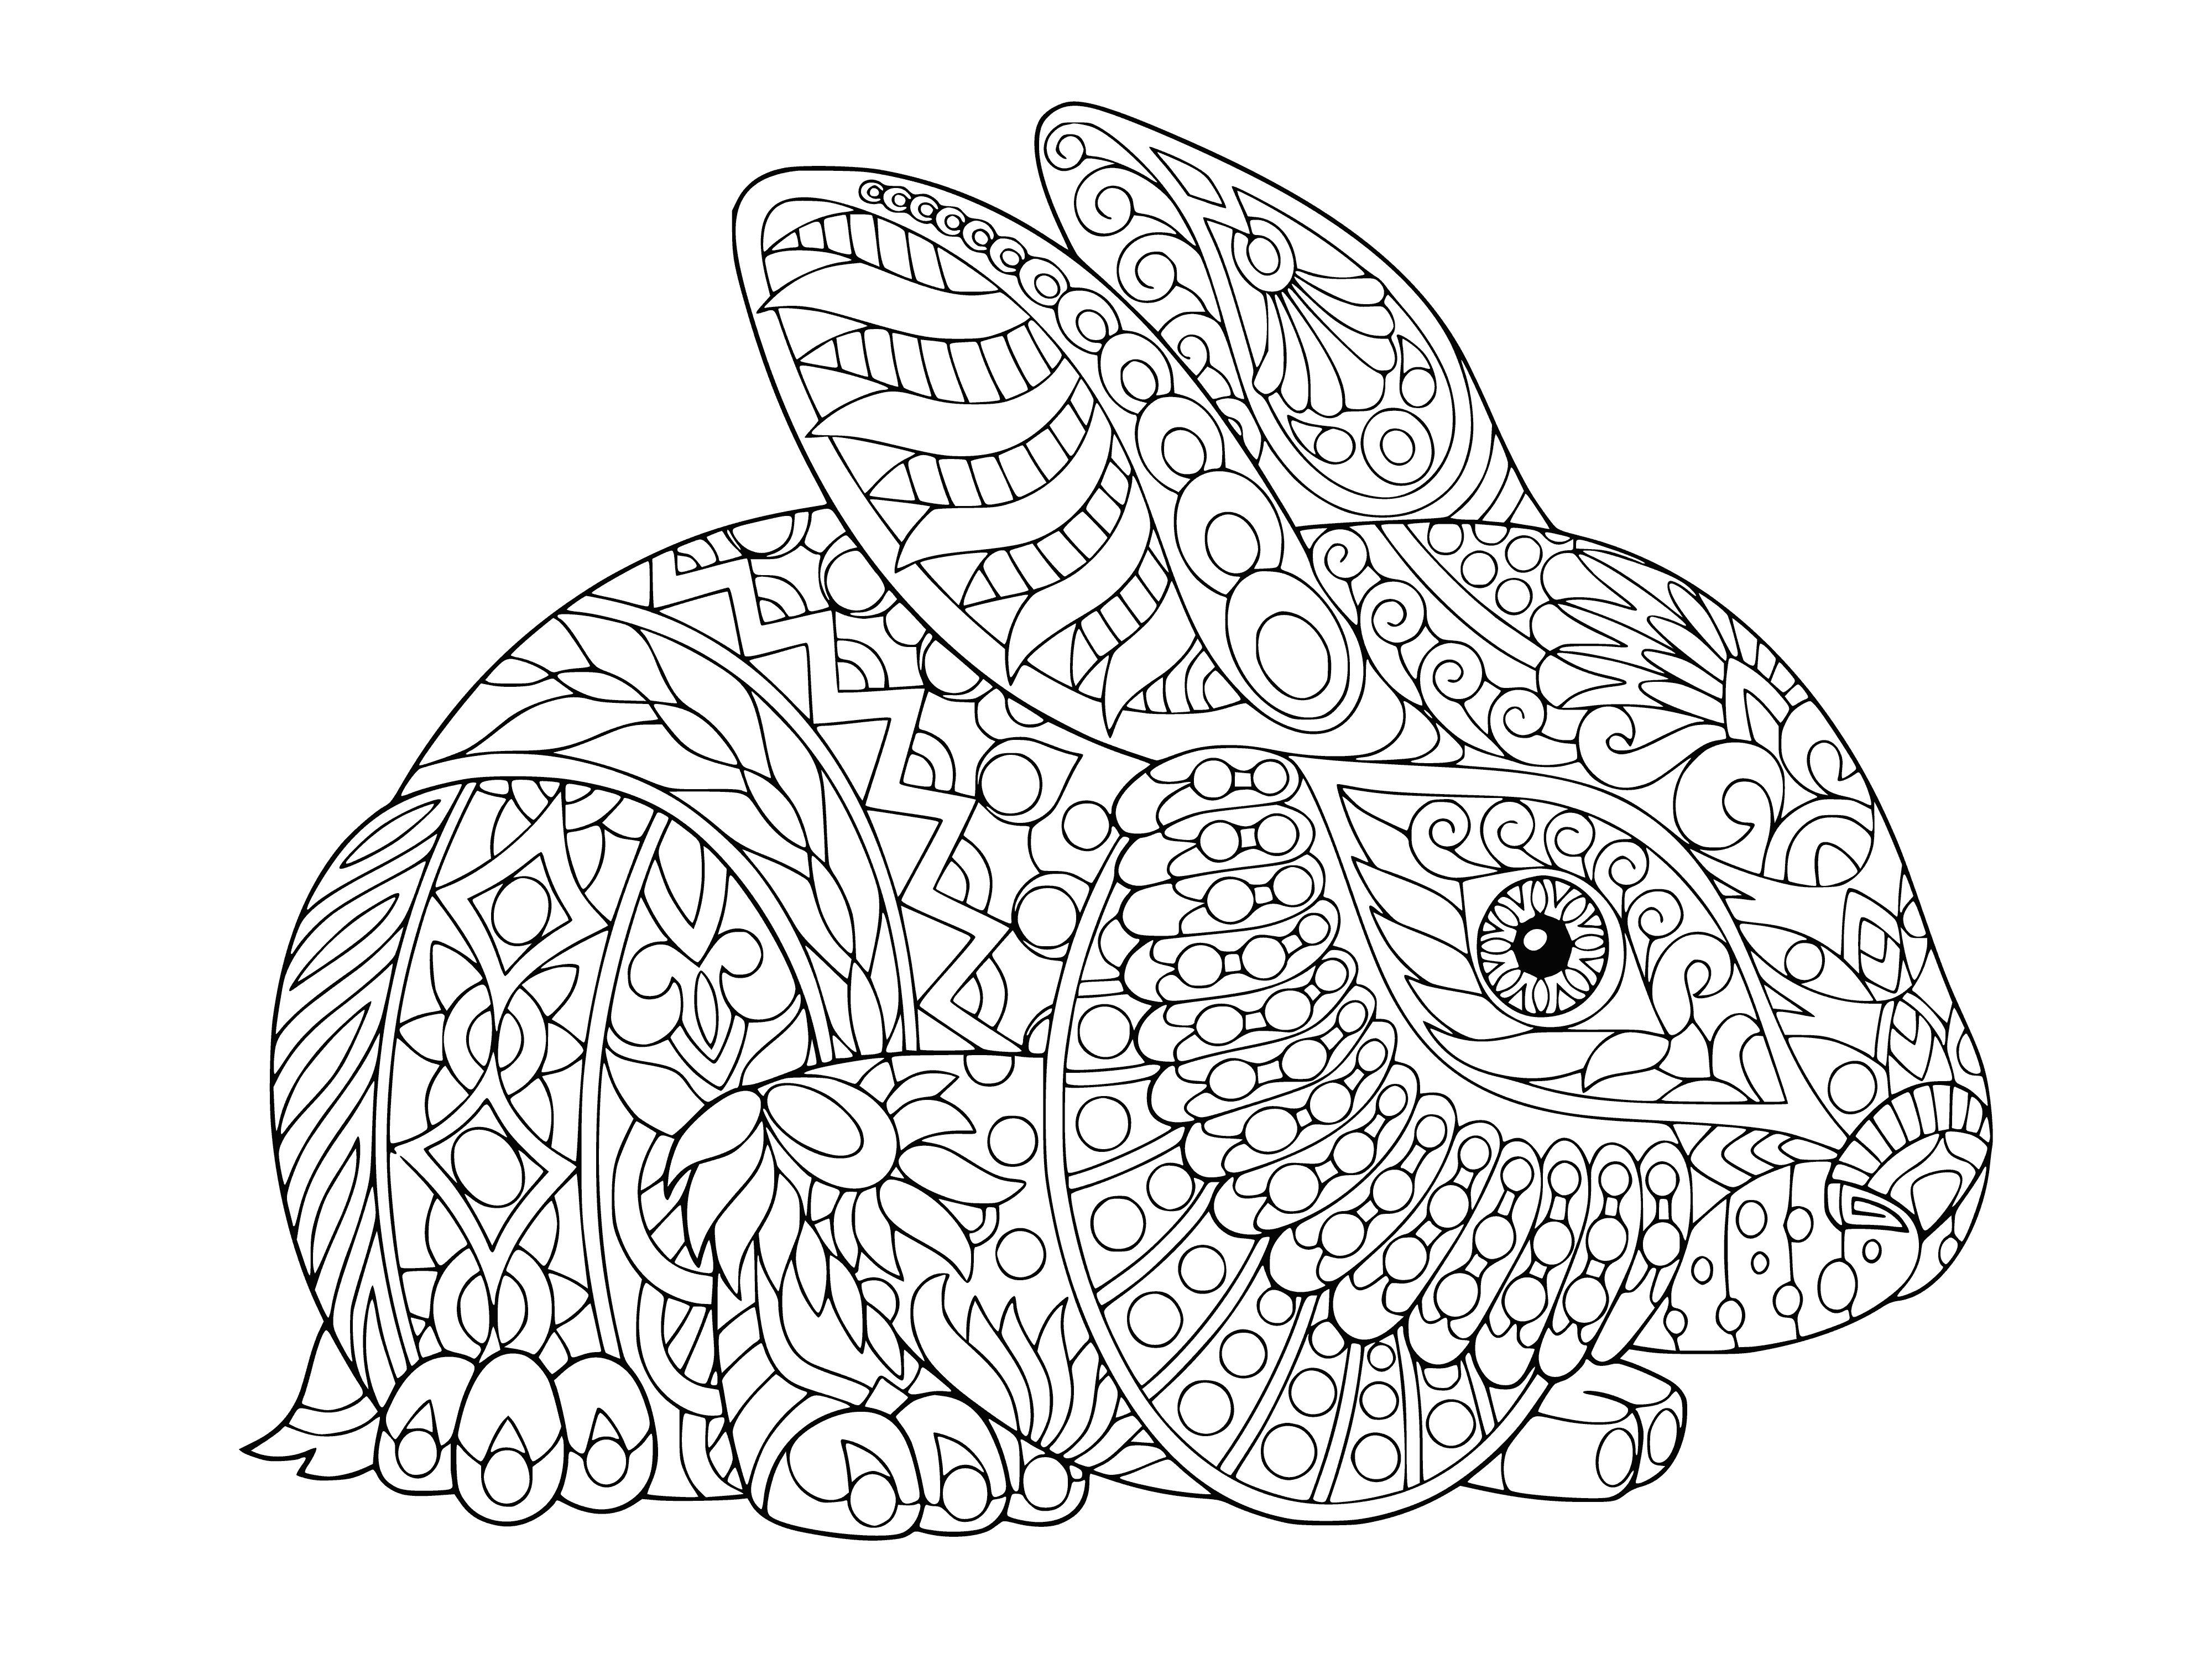 coloring page: Hare grooms w/front paws, has long black ears, black nose, brown fur, and a tail.